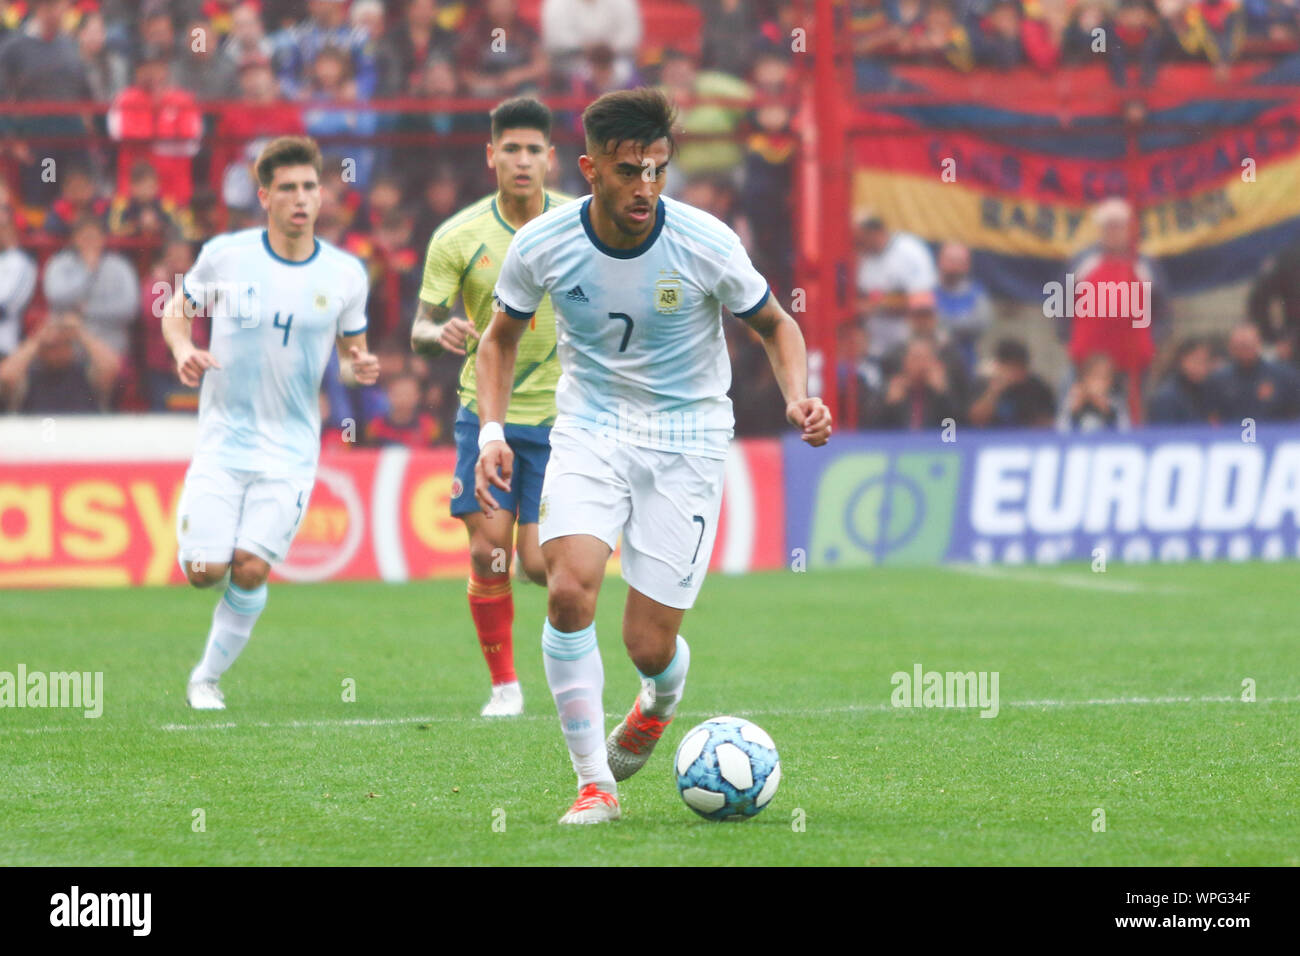 BUENOS AIRES, 08.09.2019: Nicolas Gonzalez during the match between Argentina and Colombia for friendly match on Diego Maradona Stadium in Buenos Aire Stock Photo